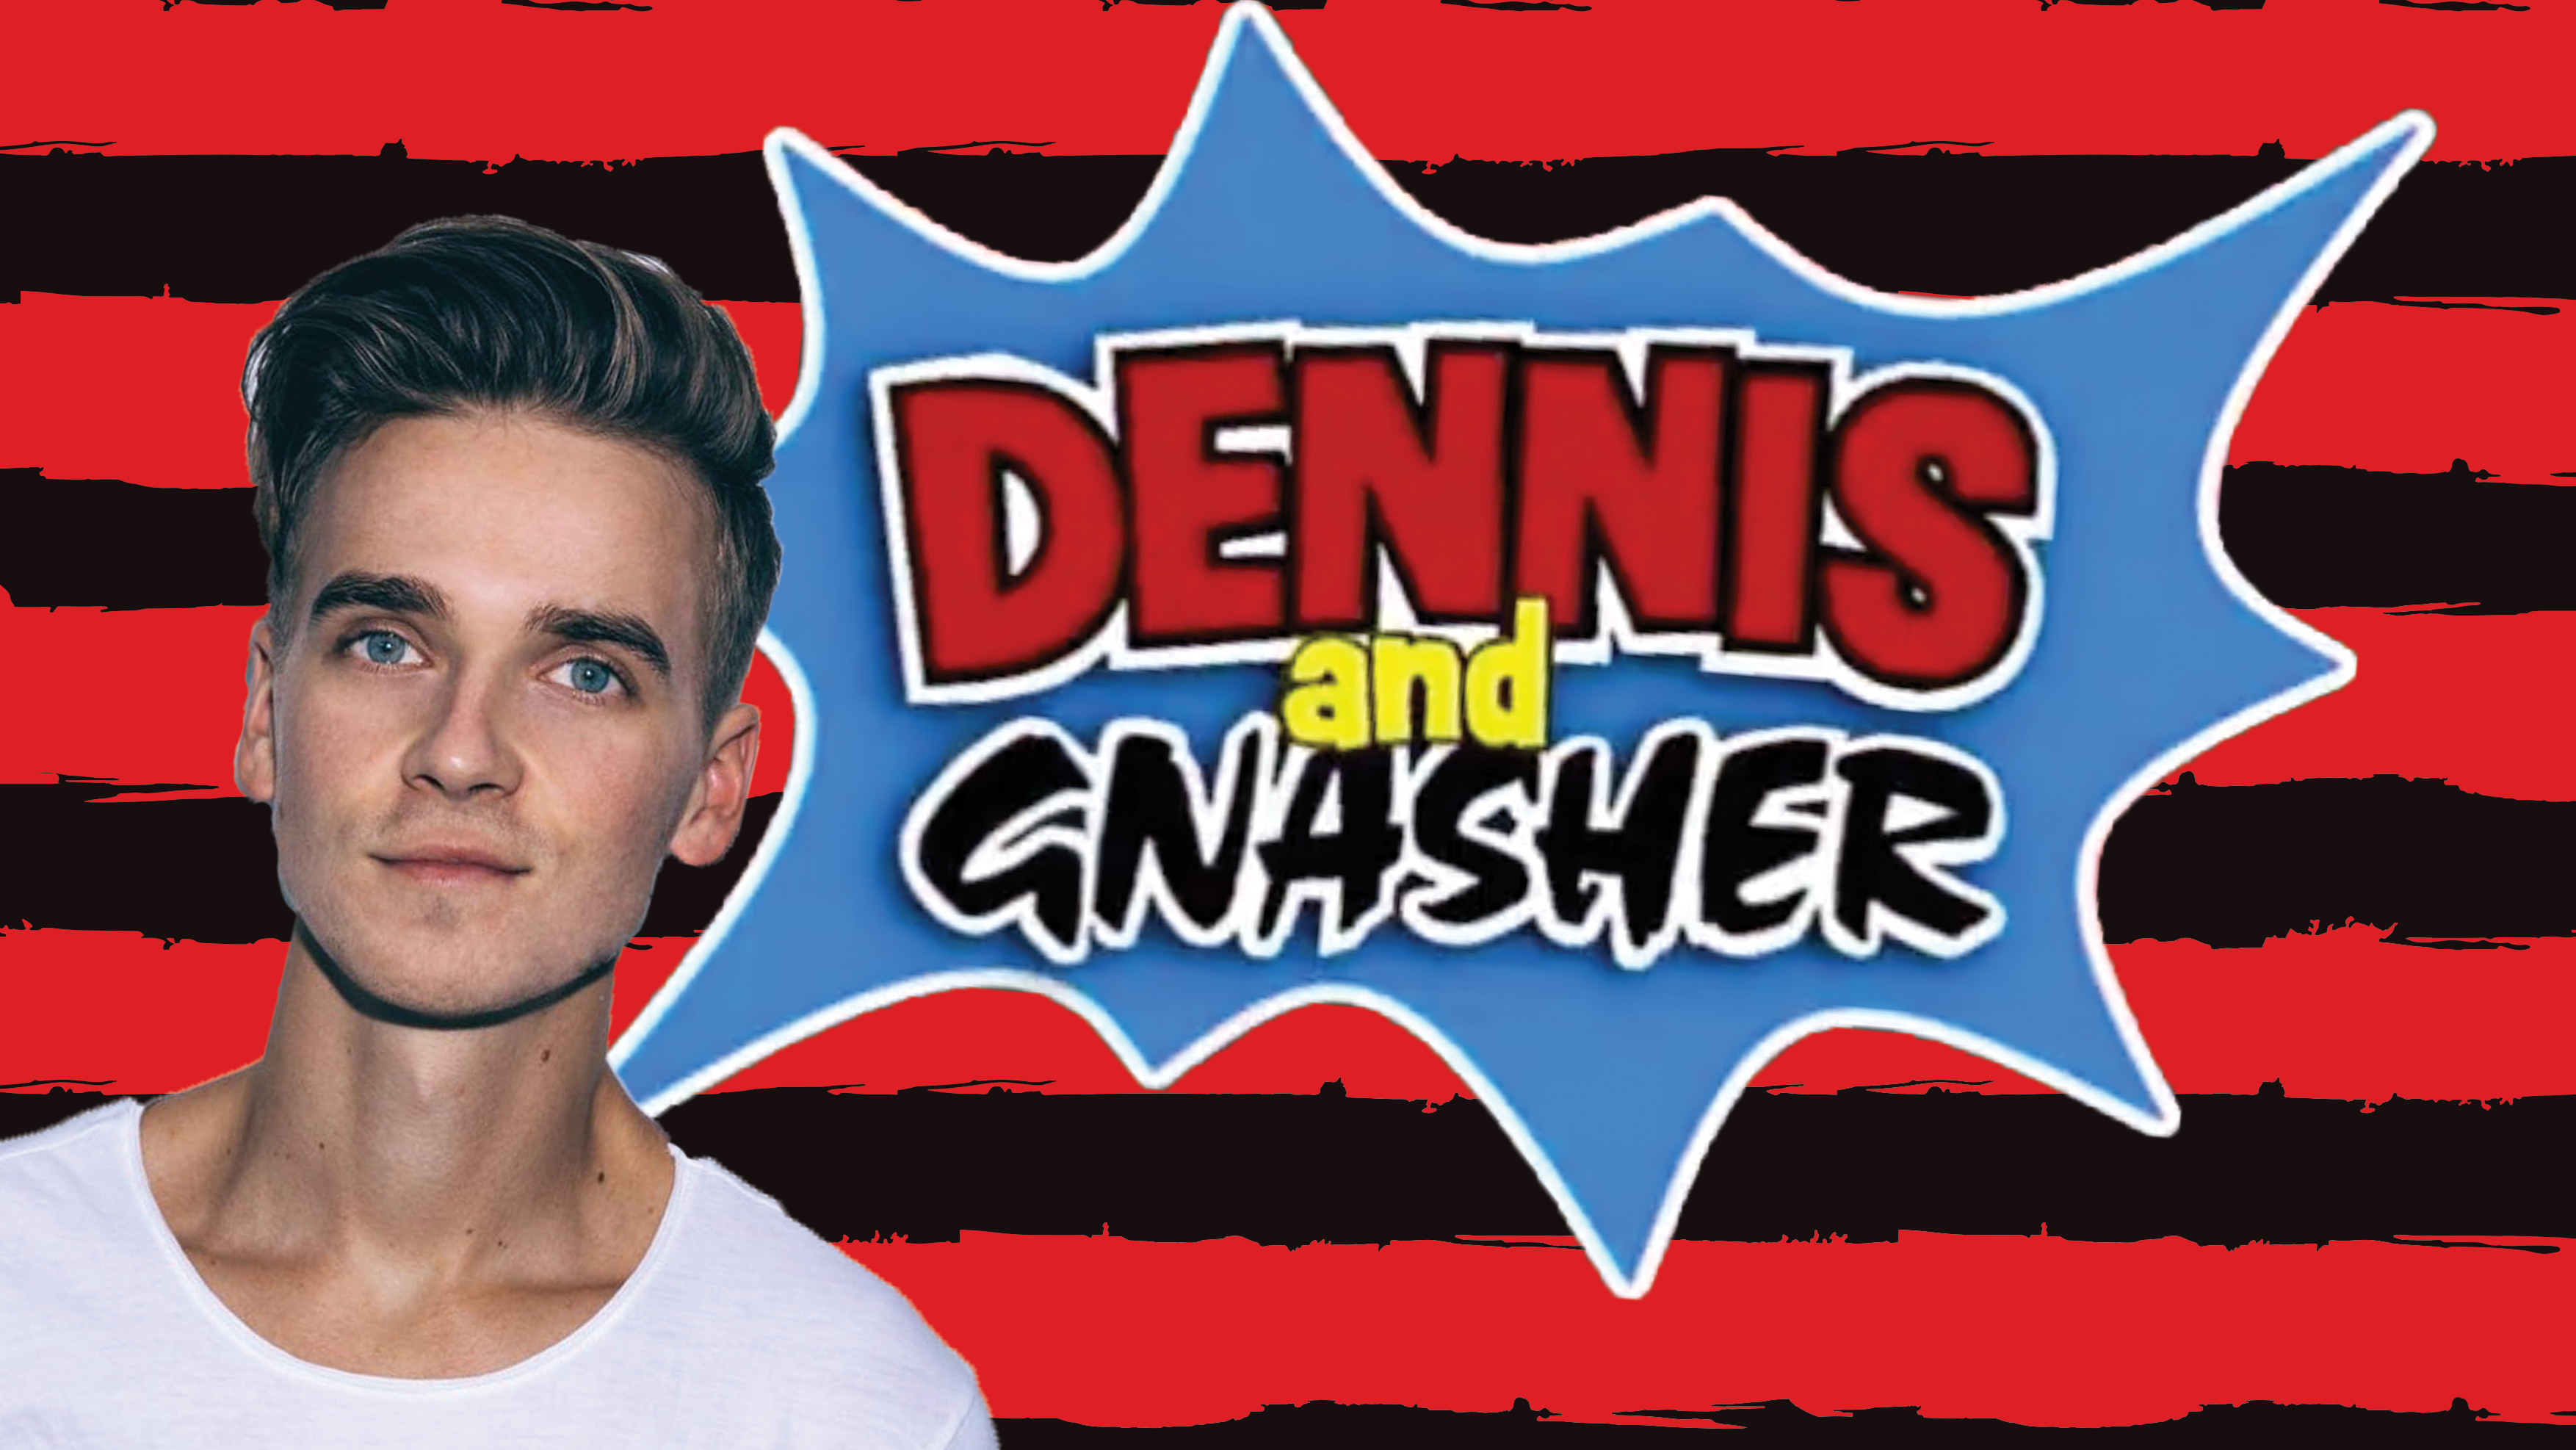 Wanted! Classic Dennis & Gnasher